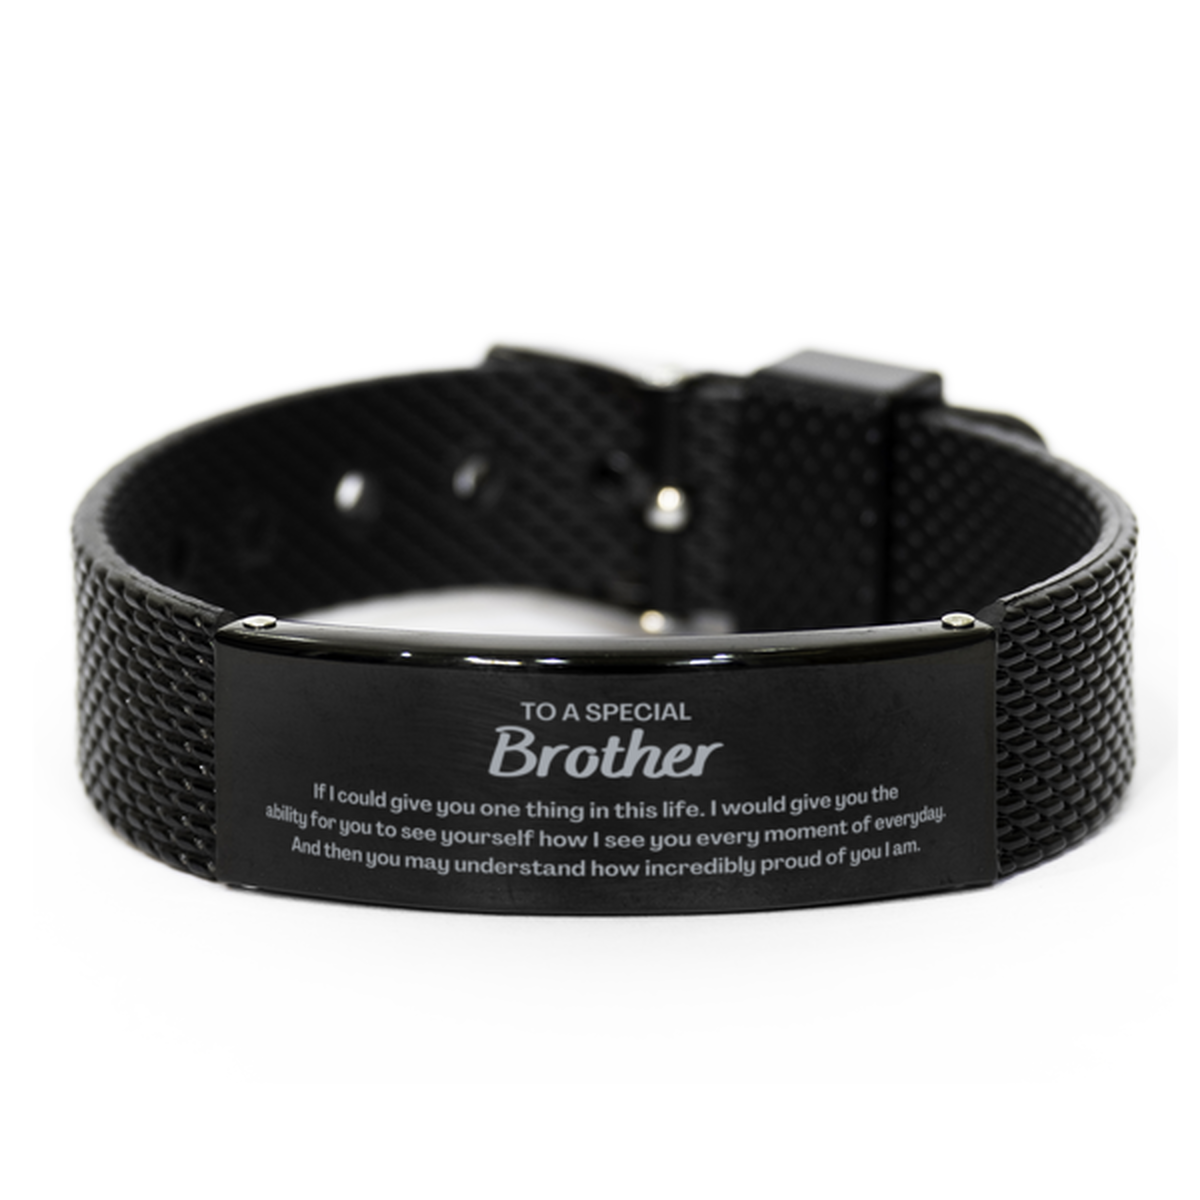 To My Brother Black Shark Mesh Bracelet, Gifts For Brother Engraved, Inspirational Gifts for Christmas Birthday, Epic Gifts for Brother To A Special Brother how incredibly proud of you I am